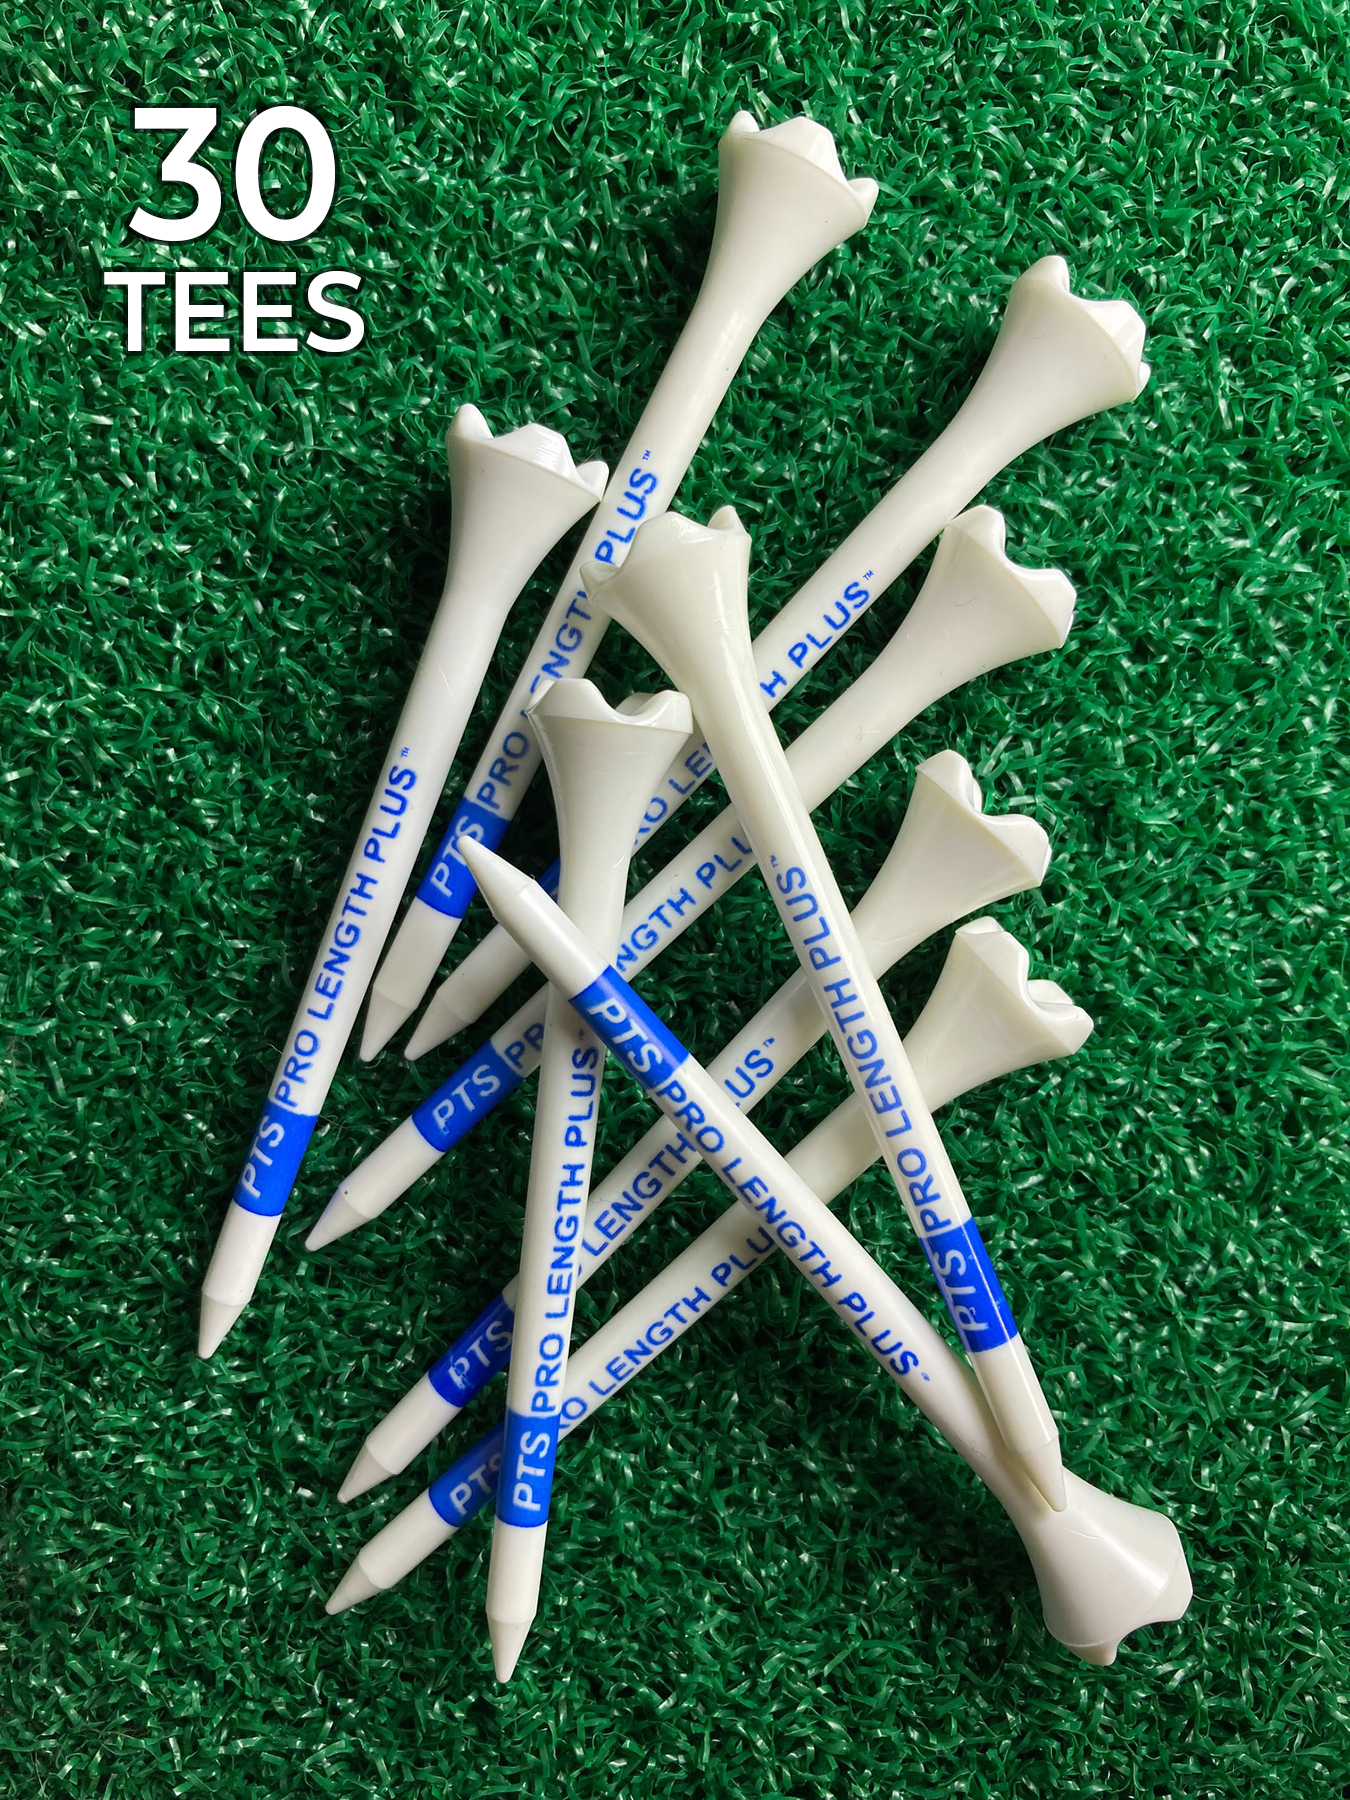 Pride Professional Tee System, 3.25 inch Pride Performance Golf Tee, 30 Count - image 3 of 9